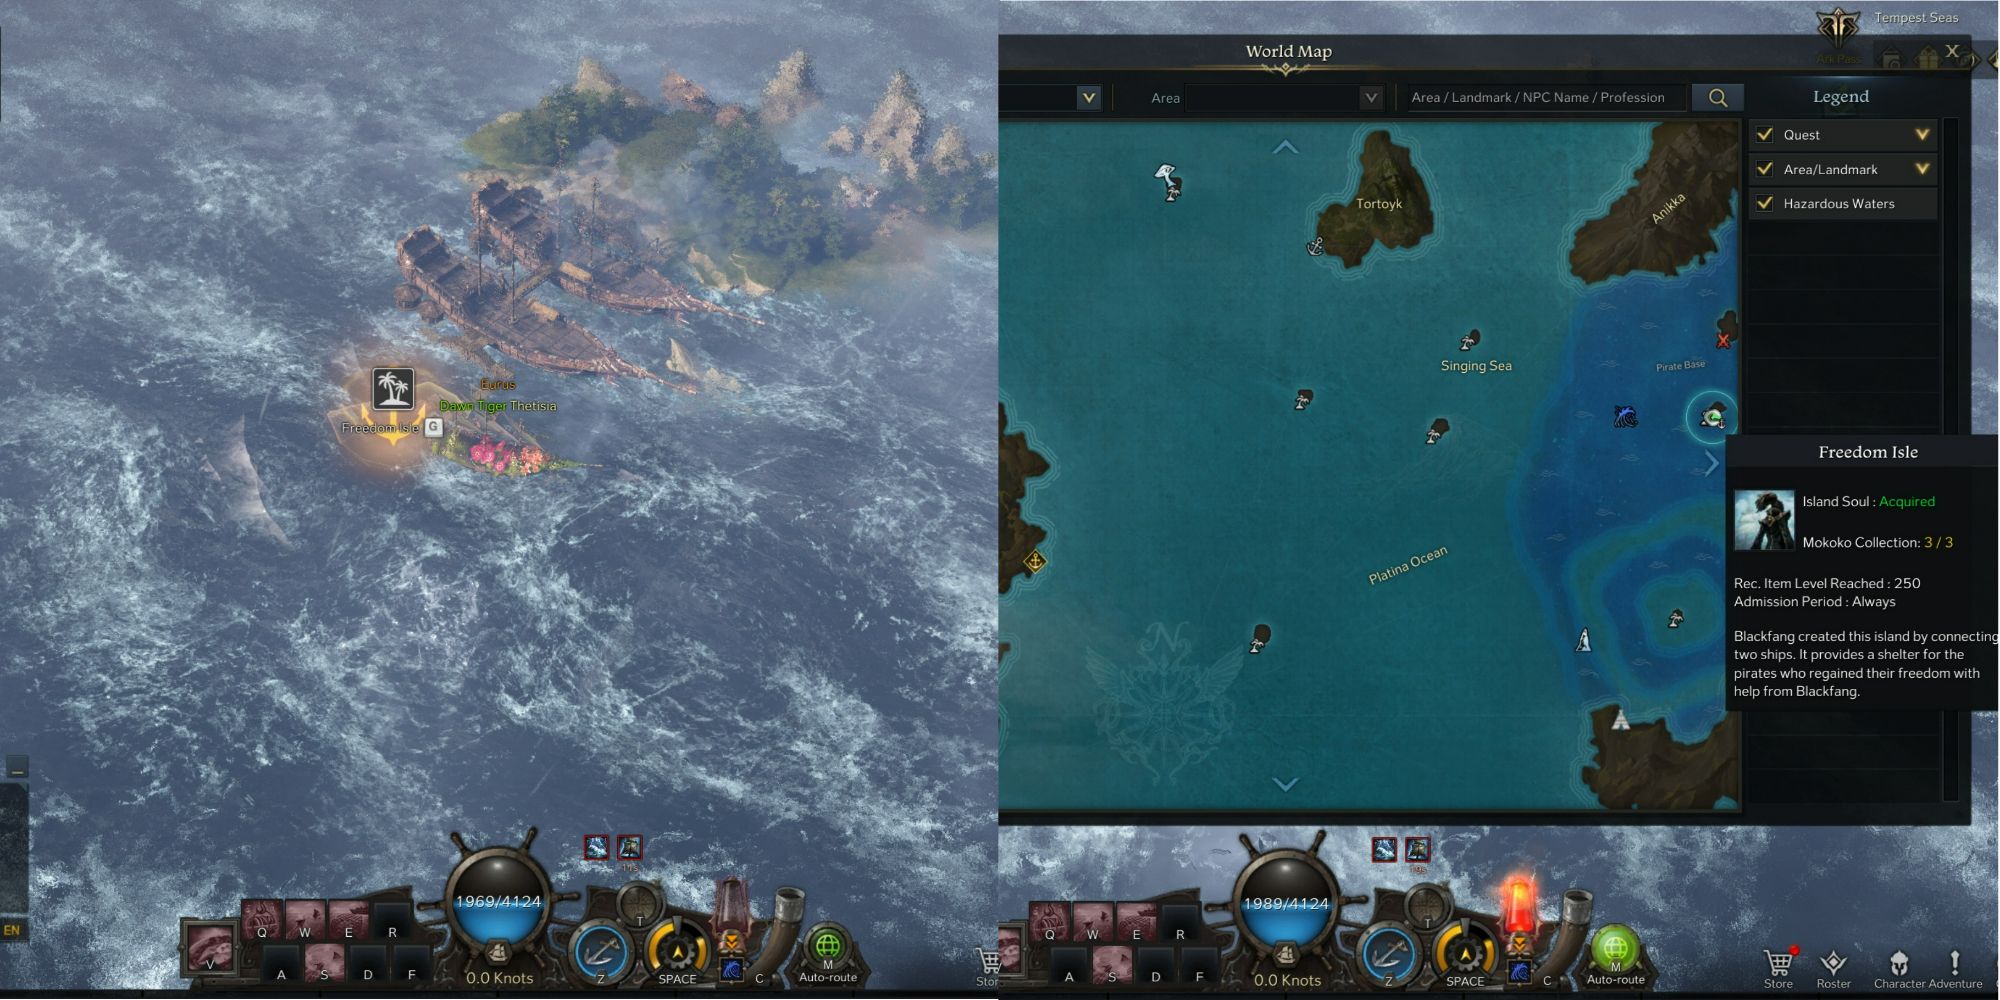 Lost Ark split image of Freedom Isle location on open sea and map